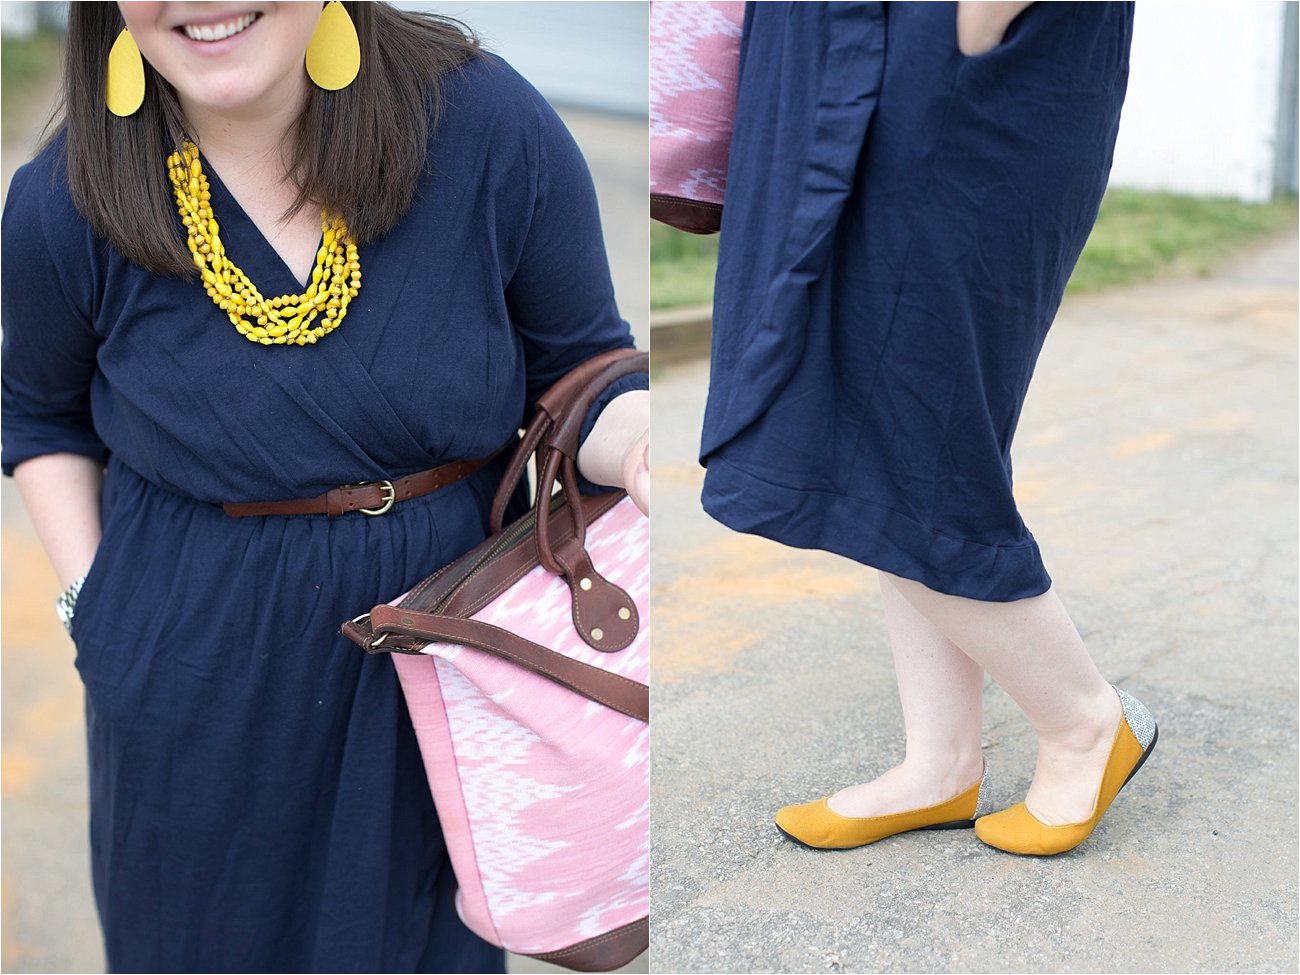 Tonle Design "Tess" Wrap Dress, Tribe Alive Weekender Bag, Sela Designs necklace, Nickel and Suede earrings, The Root Collective Shoes | North Carolina Fashion & Style Blogger | Ethical and Fair Trade Fashion (3)